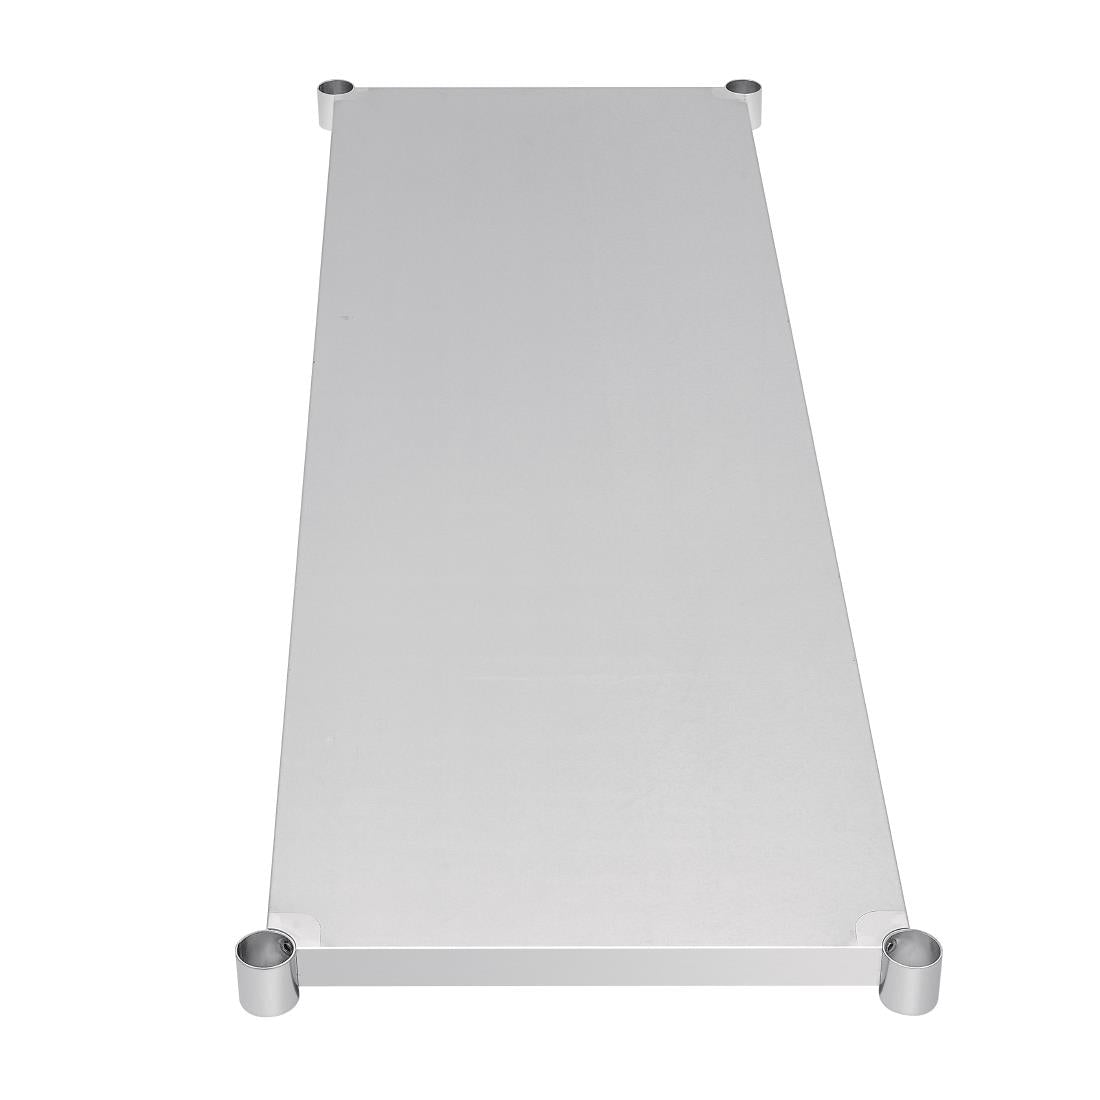 CP839 Vogue Steel Table Shelf 1800x700mm JD Catering Equipment Solutions Ltd